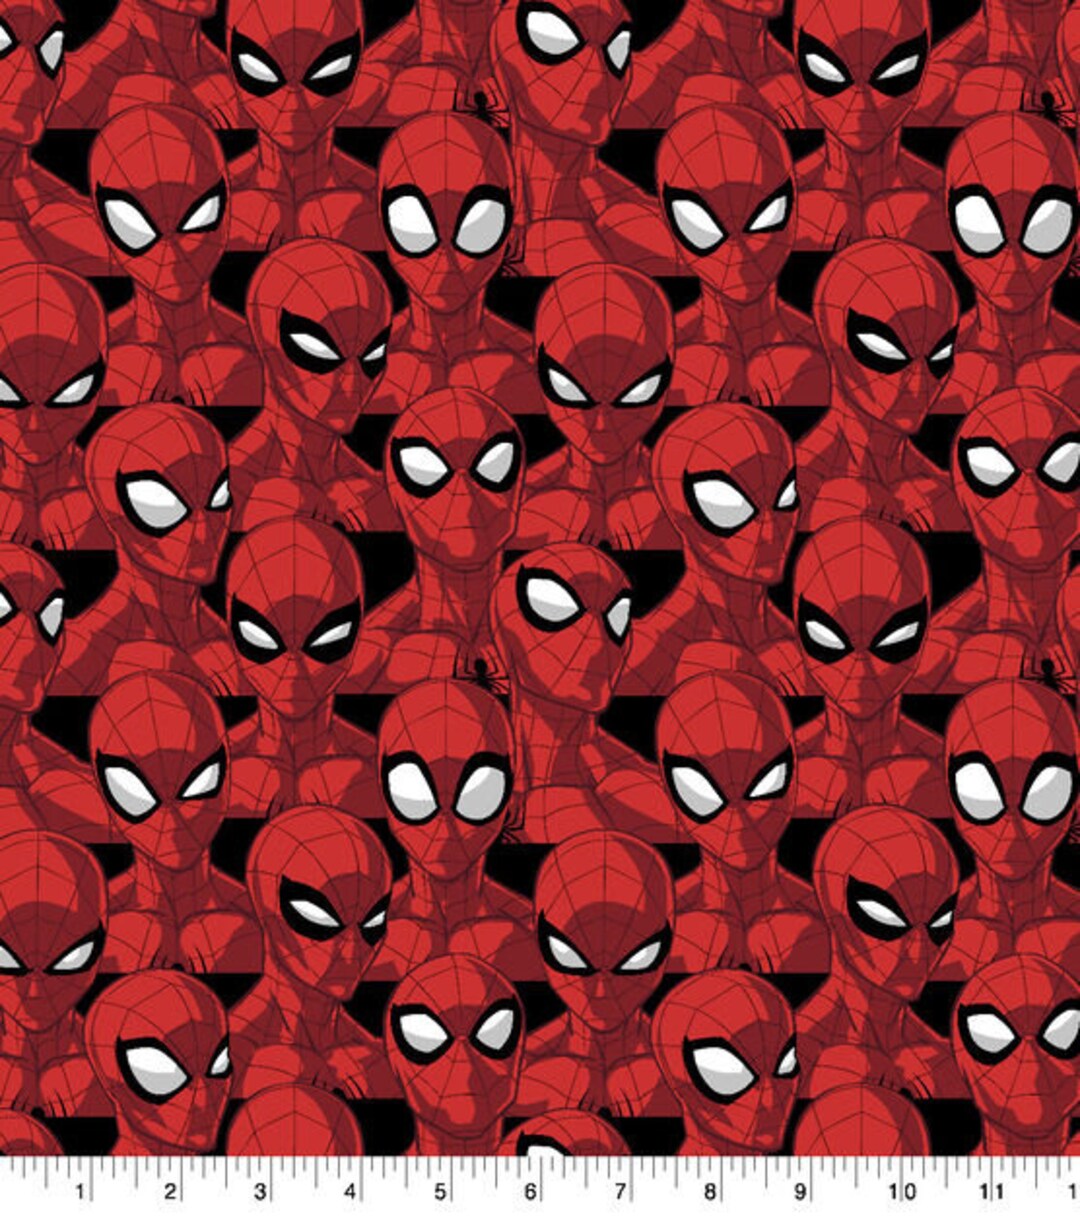 Disney Spiderman Cotton Fabric By The Meter,Printed Fabrics For Sewing  Dress Clothes Patchwork,DIY Needlework